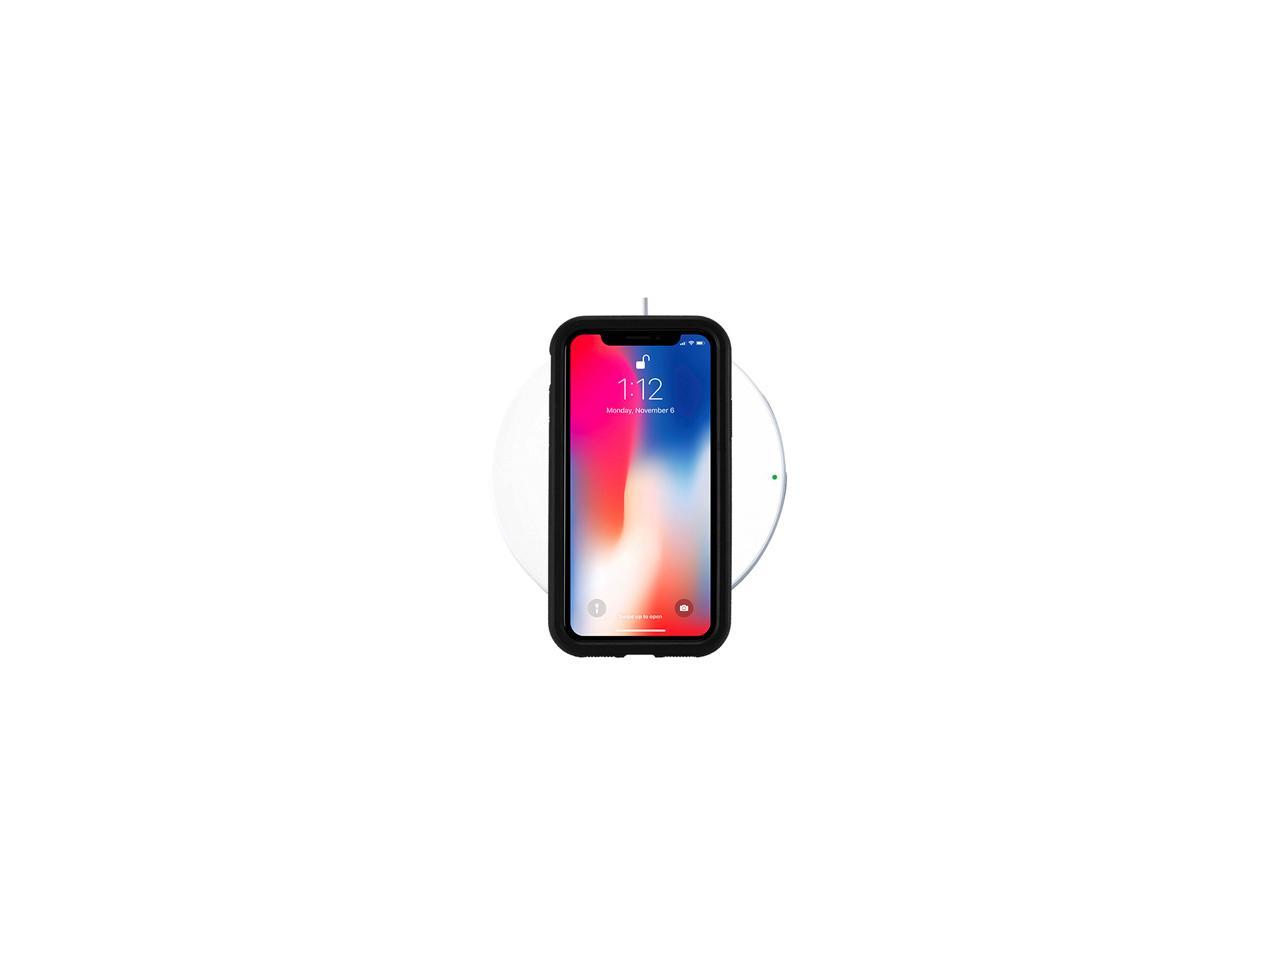 Belkin BOOSTUP Qi Wireless Charging Pad For iPhone X, iPhone 8 Plus, iPhone 8. Fast wireless Charging Performance For your iPhone X, iPhone 8 and 8 Plus. Delivers up to 7.5W of Power Model BLKF7U027DQ